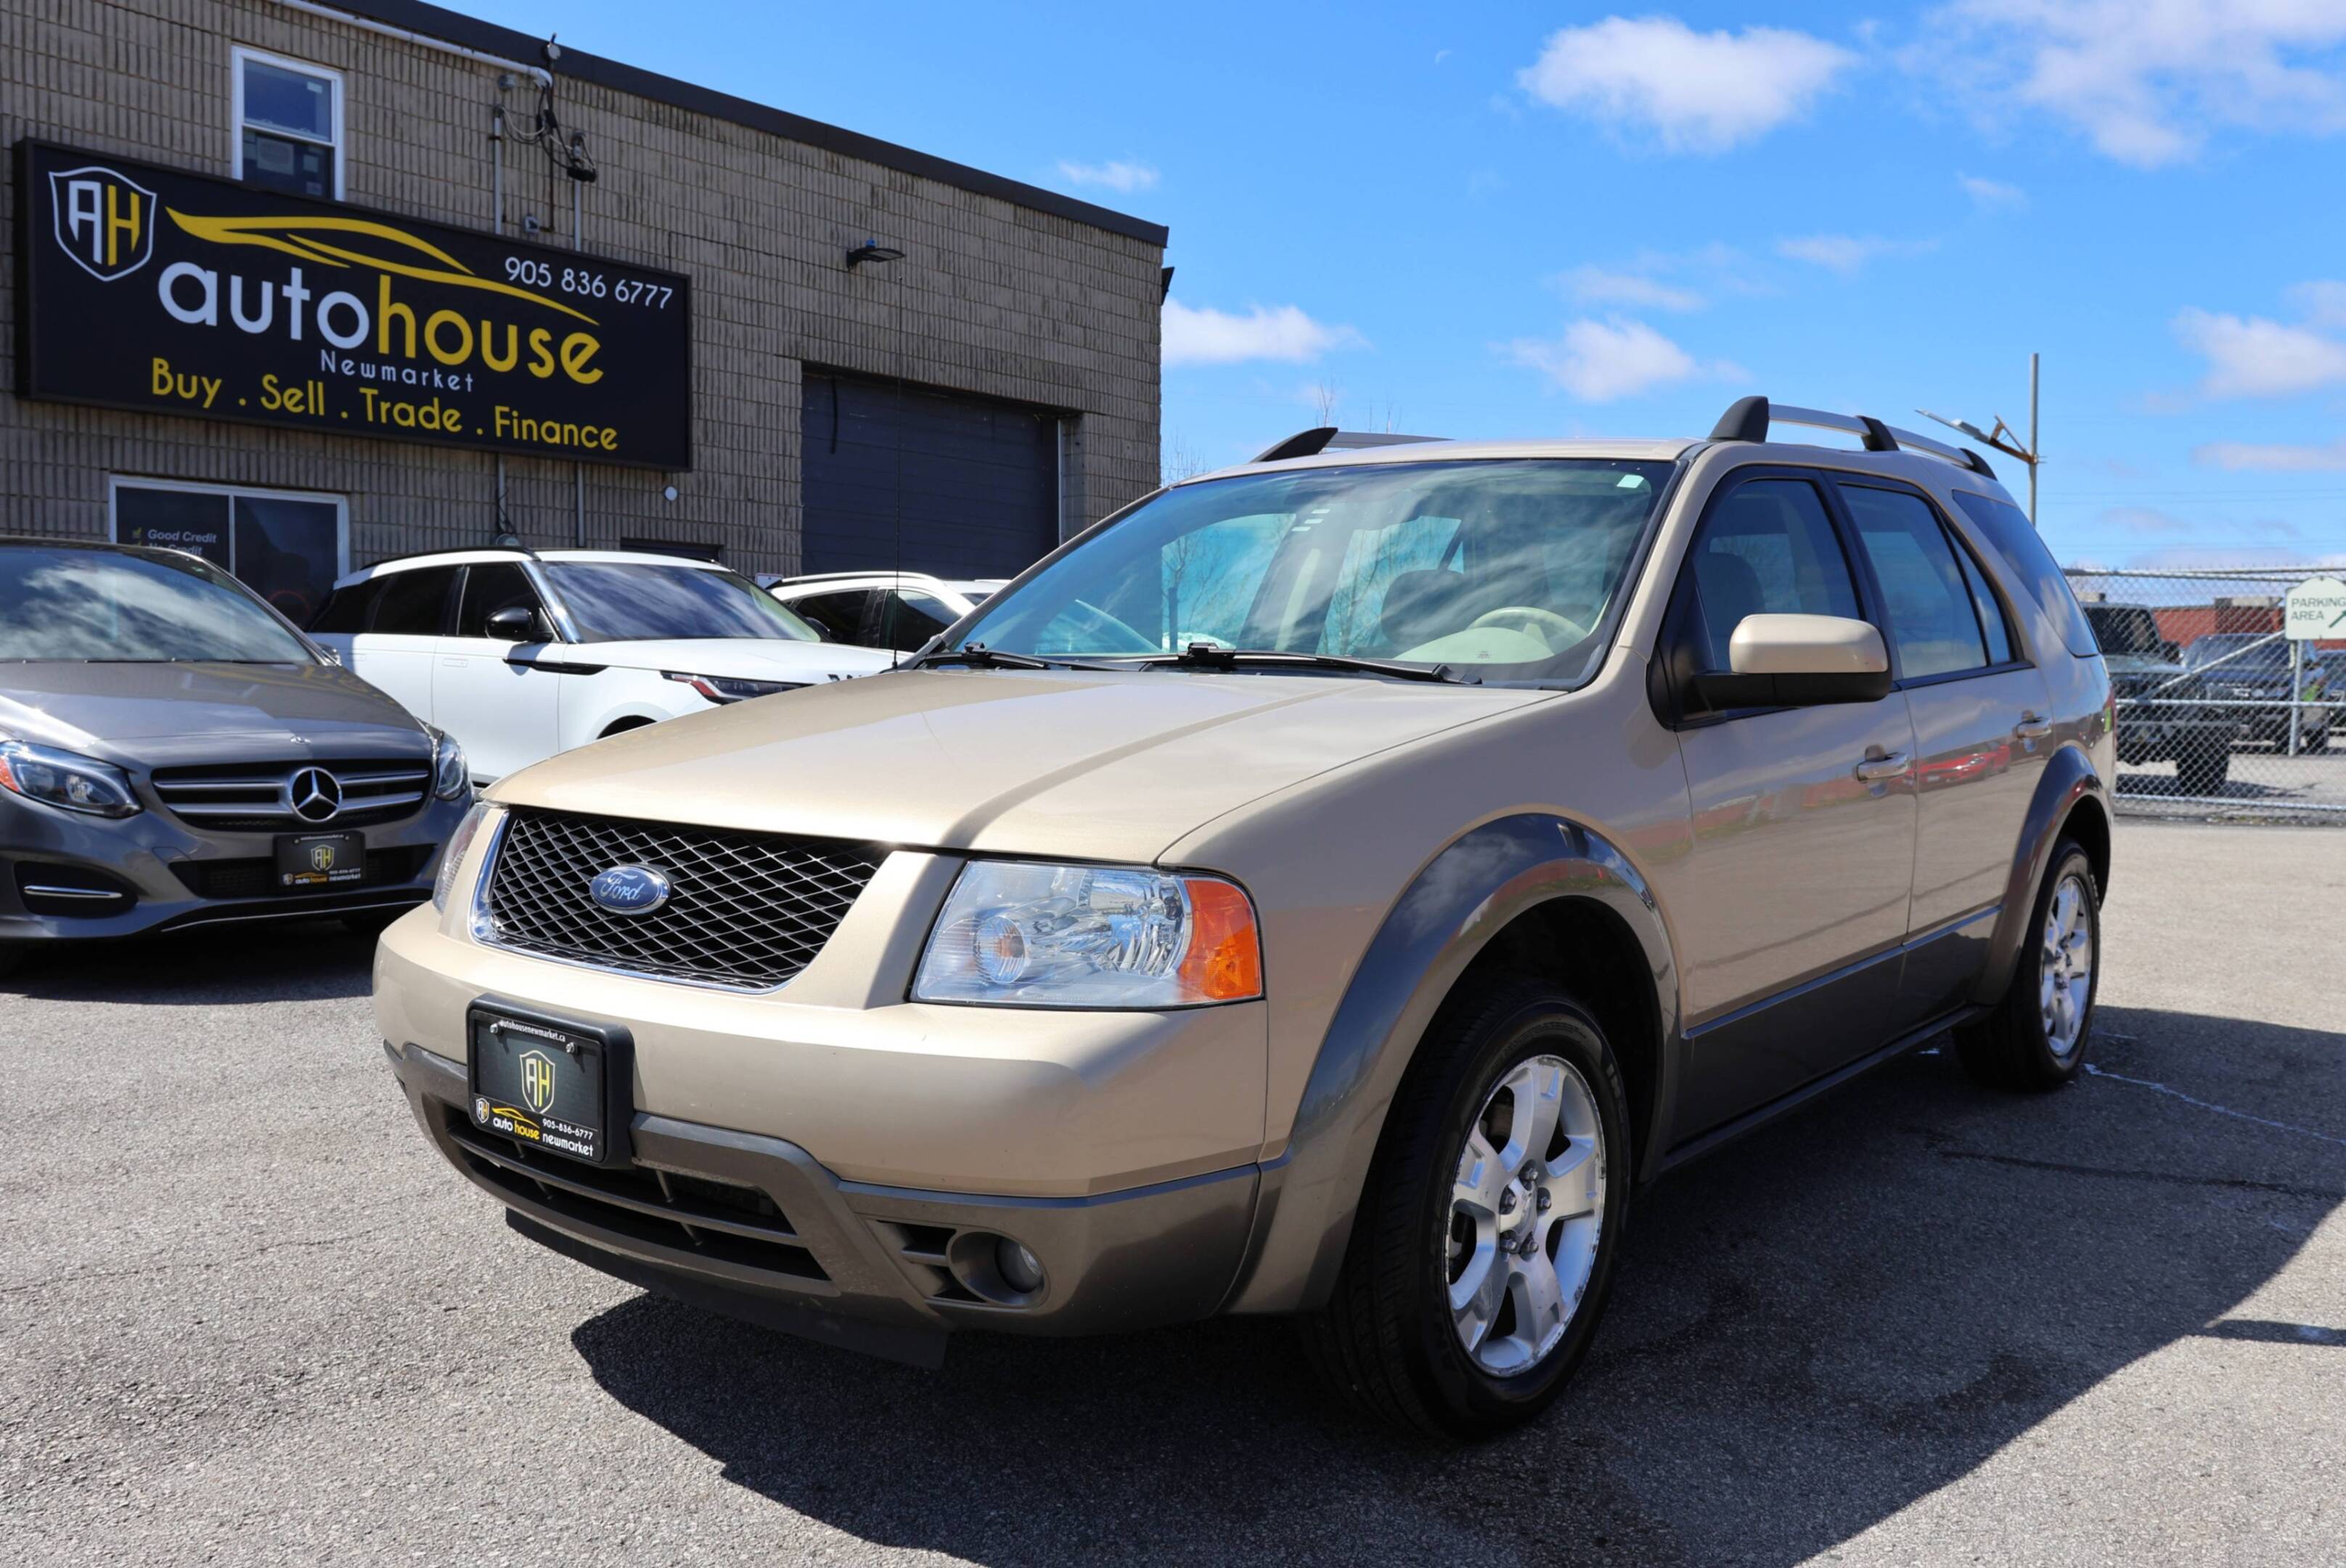 2007 Ford Freestyle SEL - 7PASS/ POWER SEATS/ POWER WINDOWS/ CD PLAYER